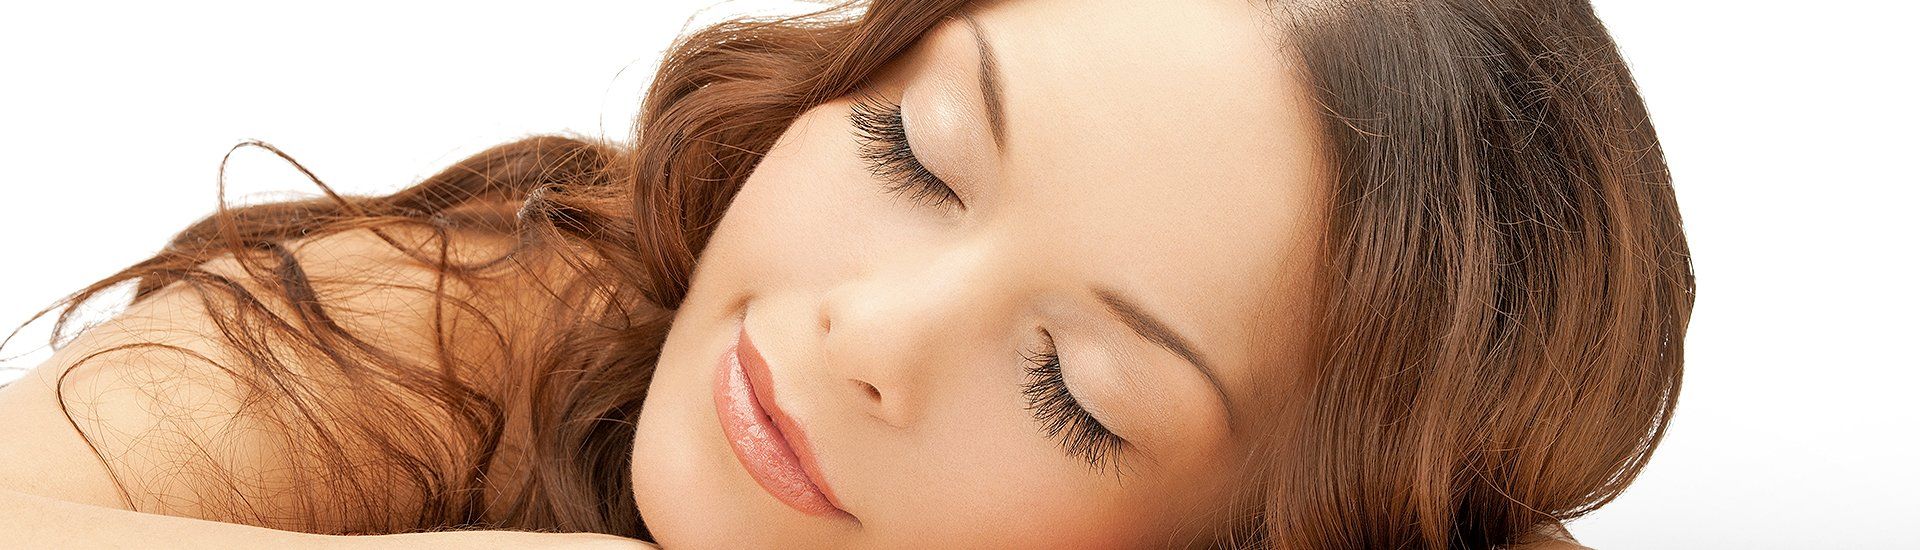 Visit us for electrolysis treatments